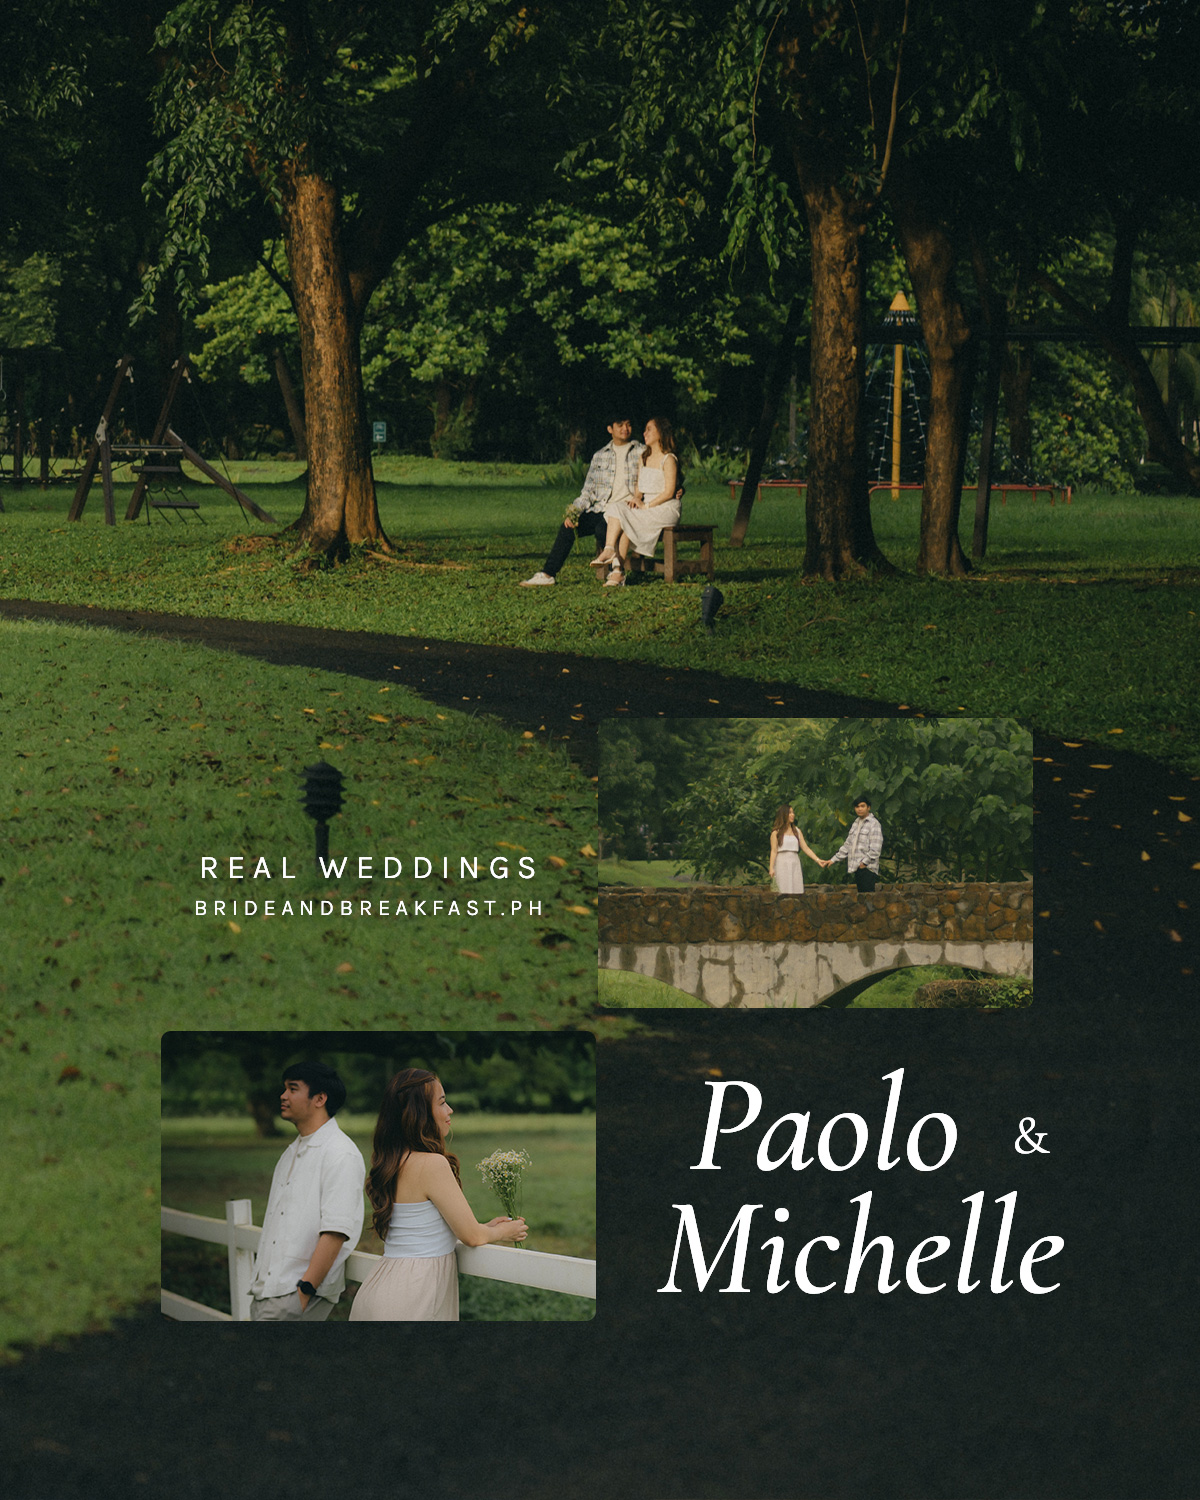 Paolo and Michelle